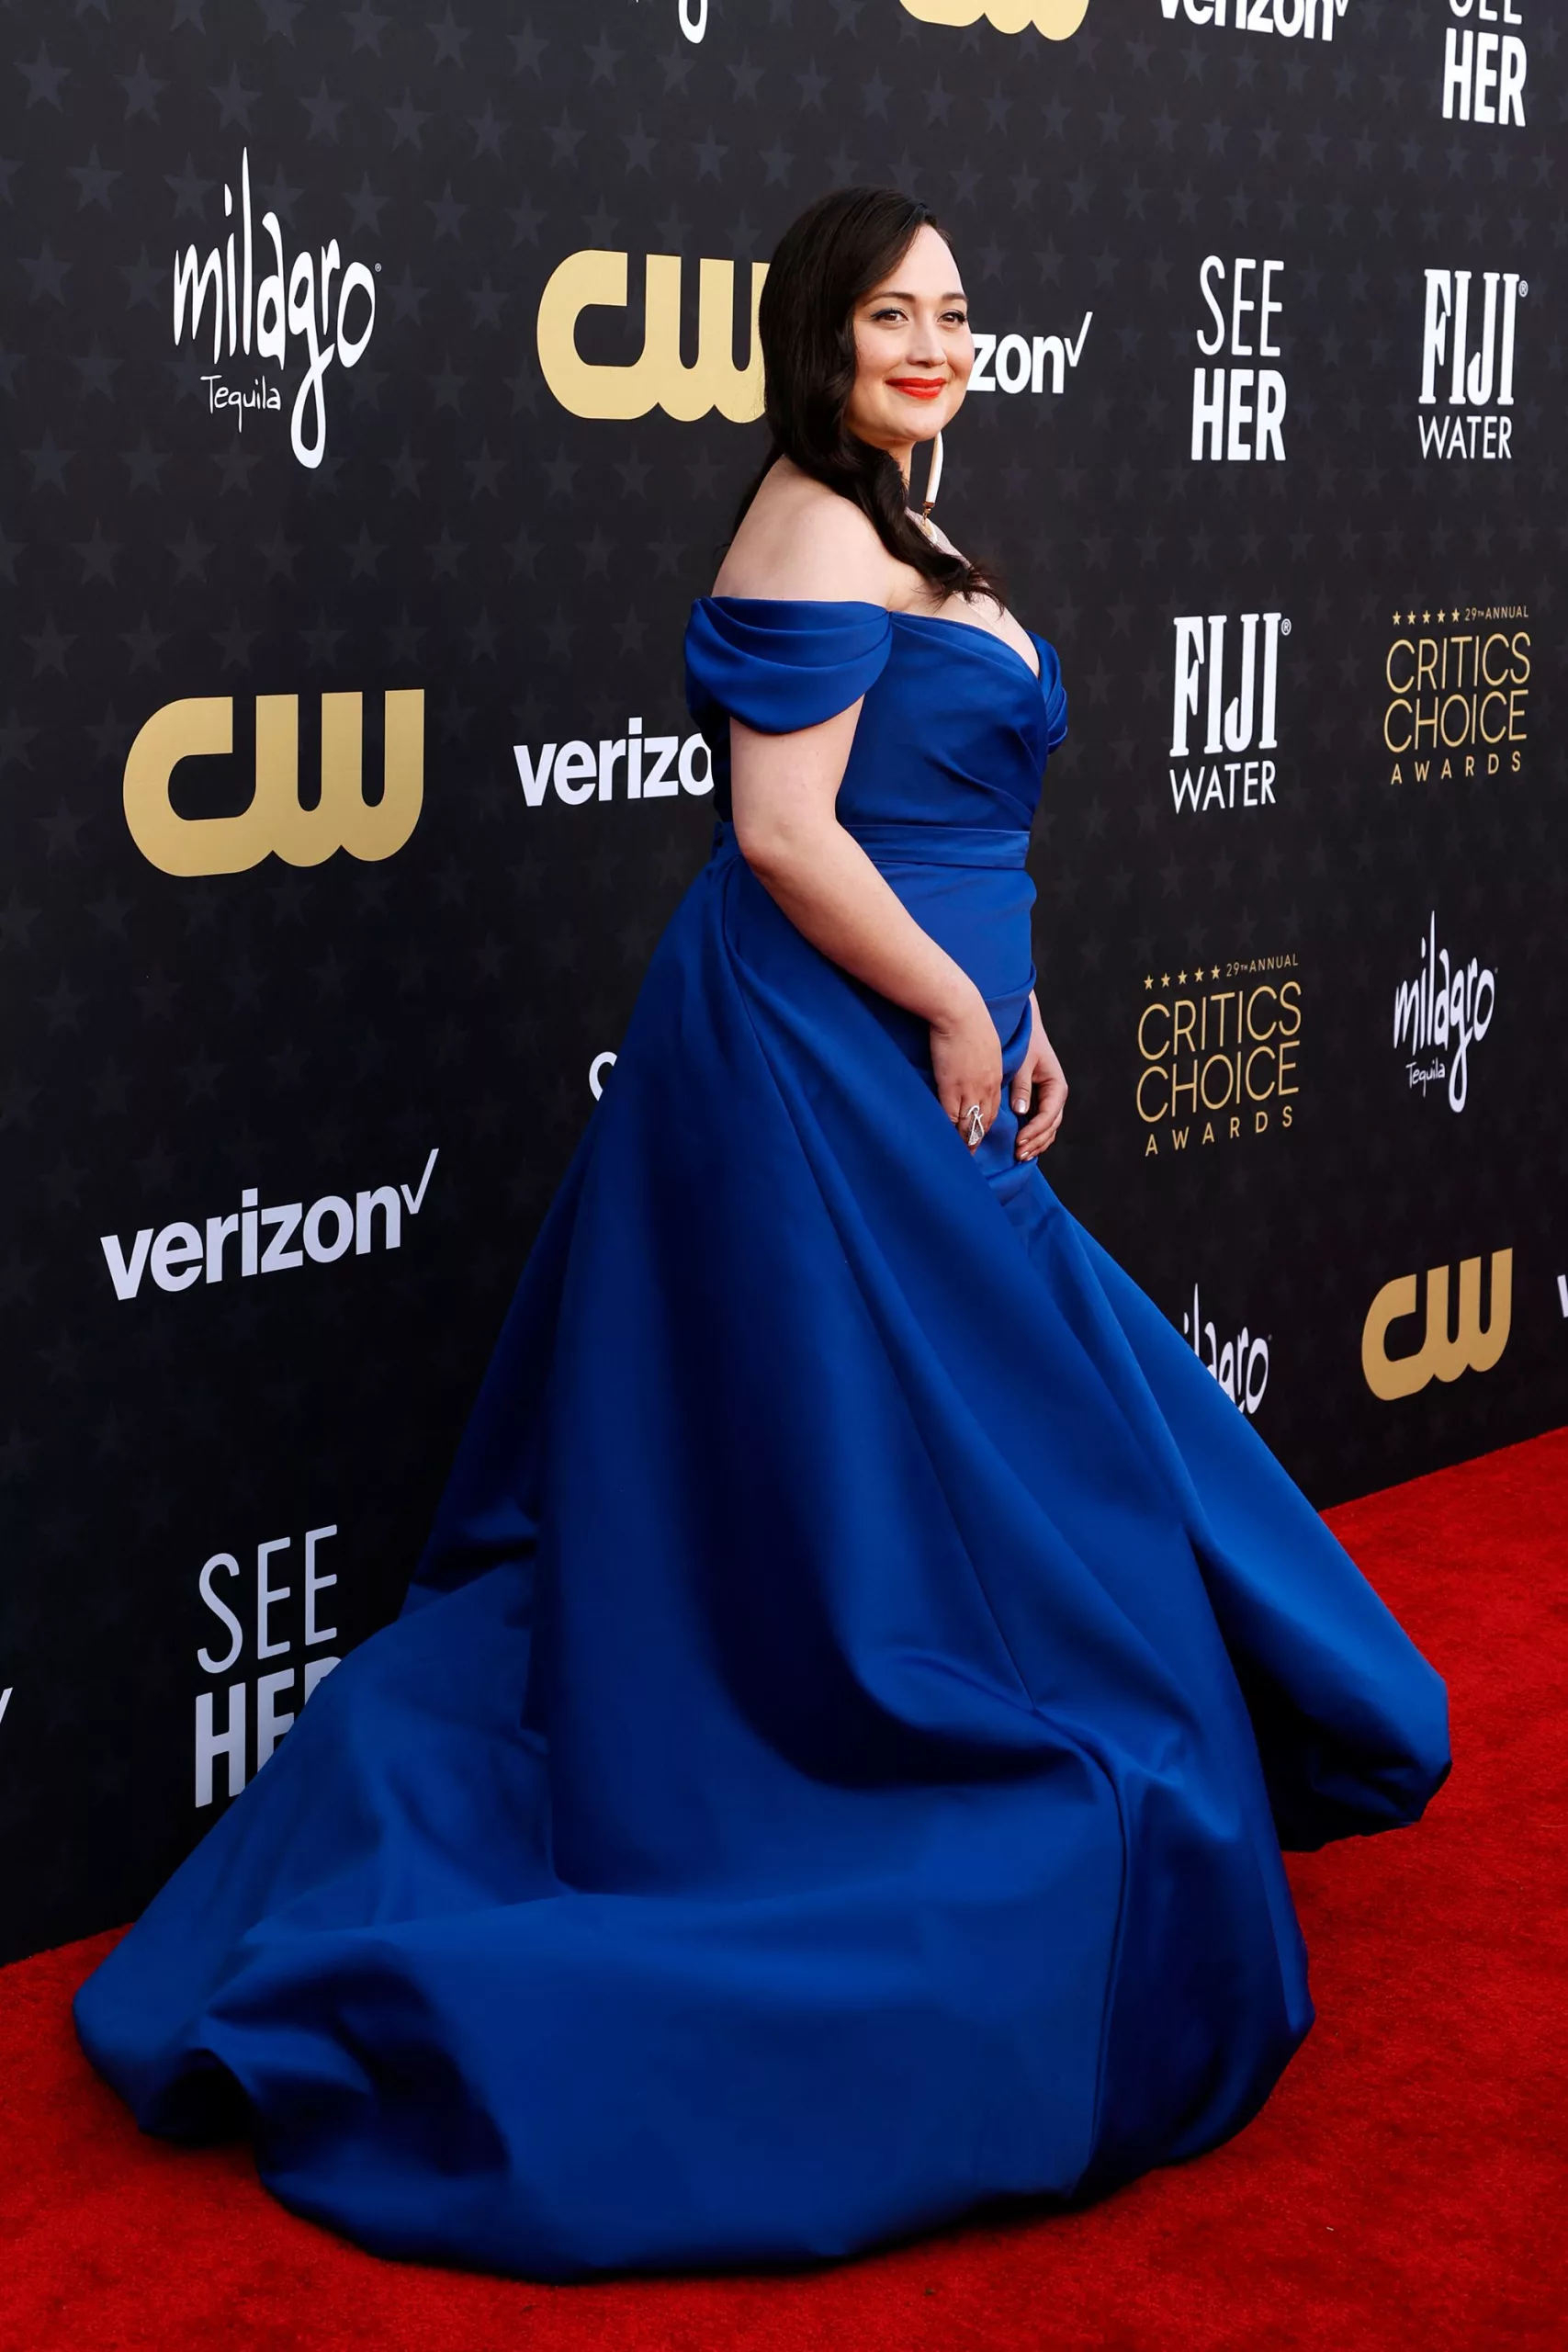 Lily Gladstone wore a deep blue satin dress by Christian Siriano, with her lipstick adding an extra pop of color.